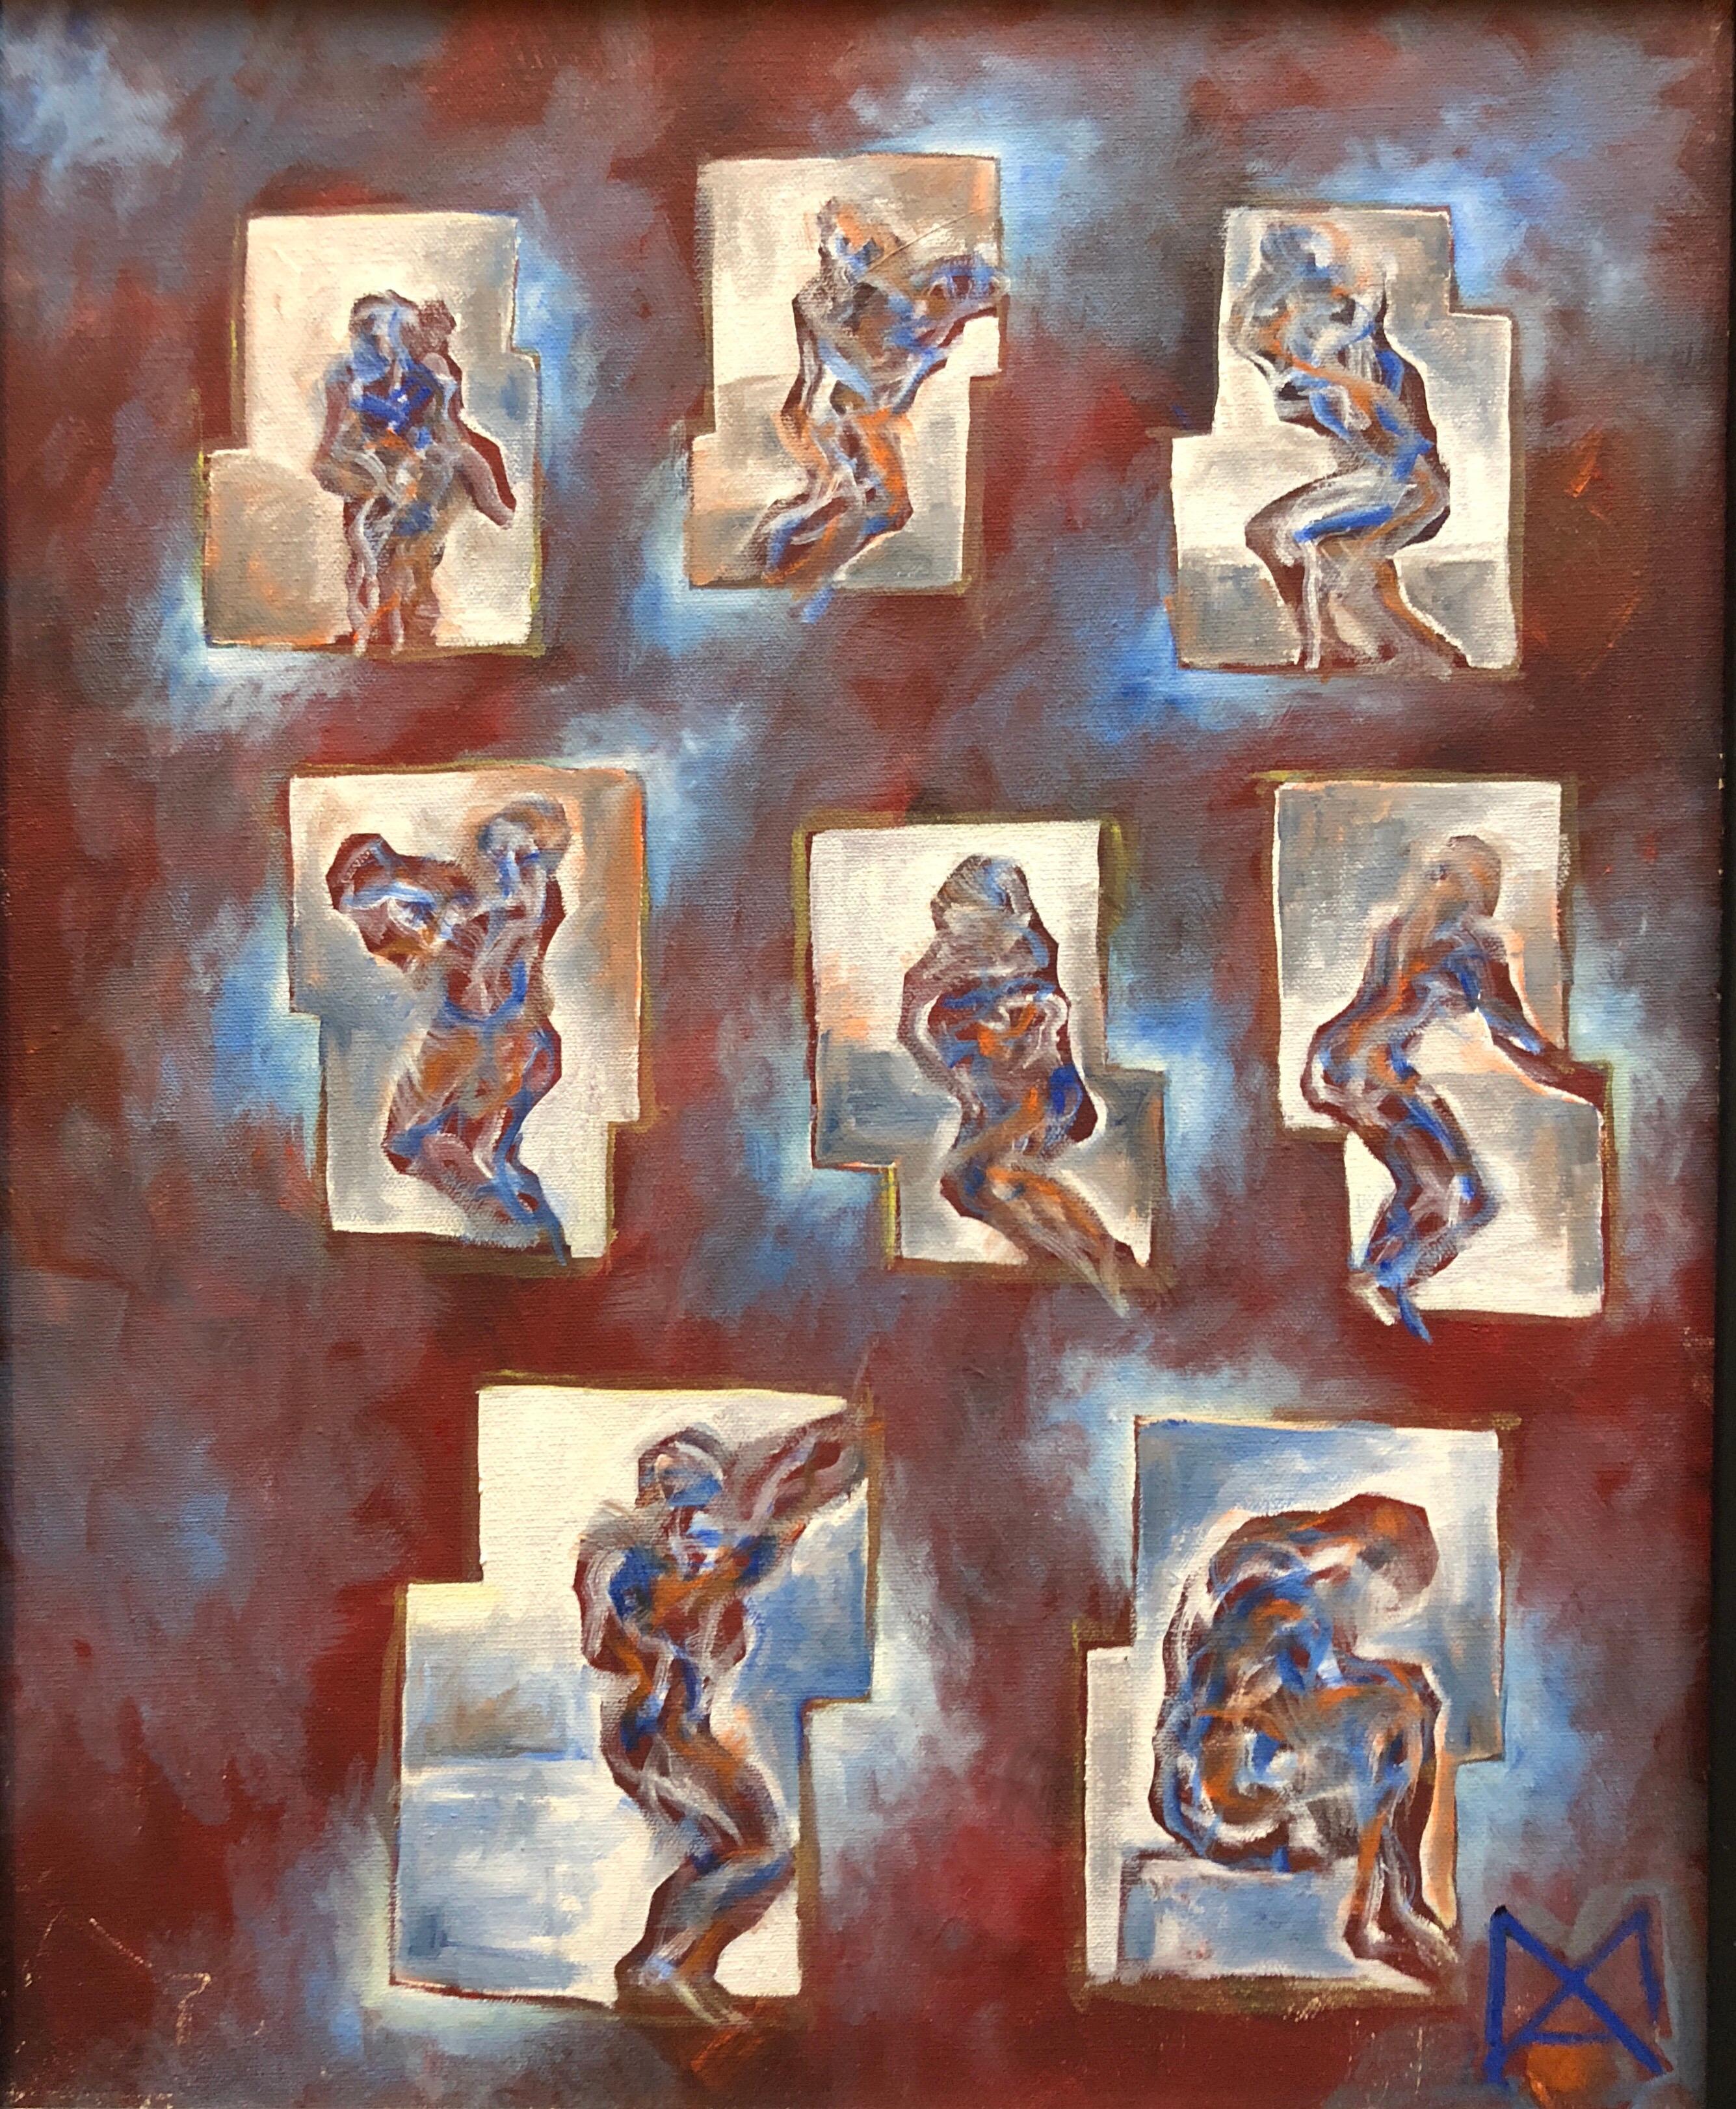 20x16 actual canvas. 27x23.5 incl. frame. Oil on canvas. signed with monogram. 
Figurative Abstraction gestural painting. Matthias Alfen’s series of Janus figures are an innovation in figural art predicated on the advances made by the Futurist